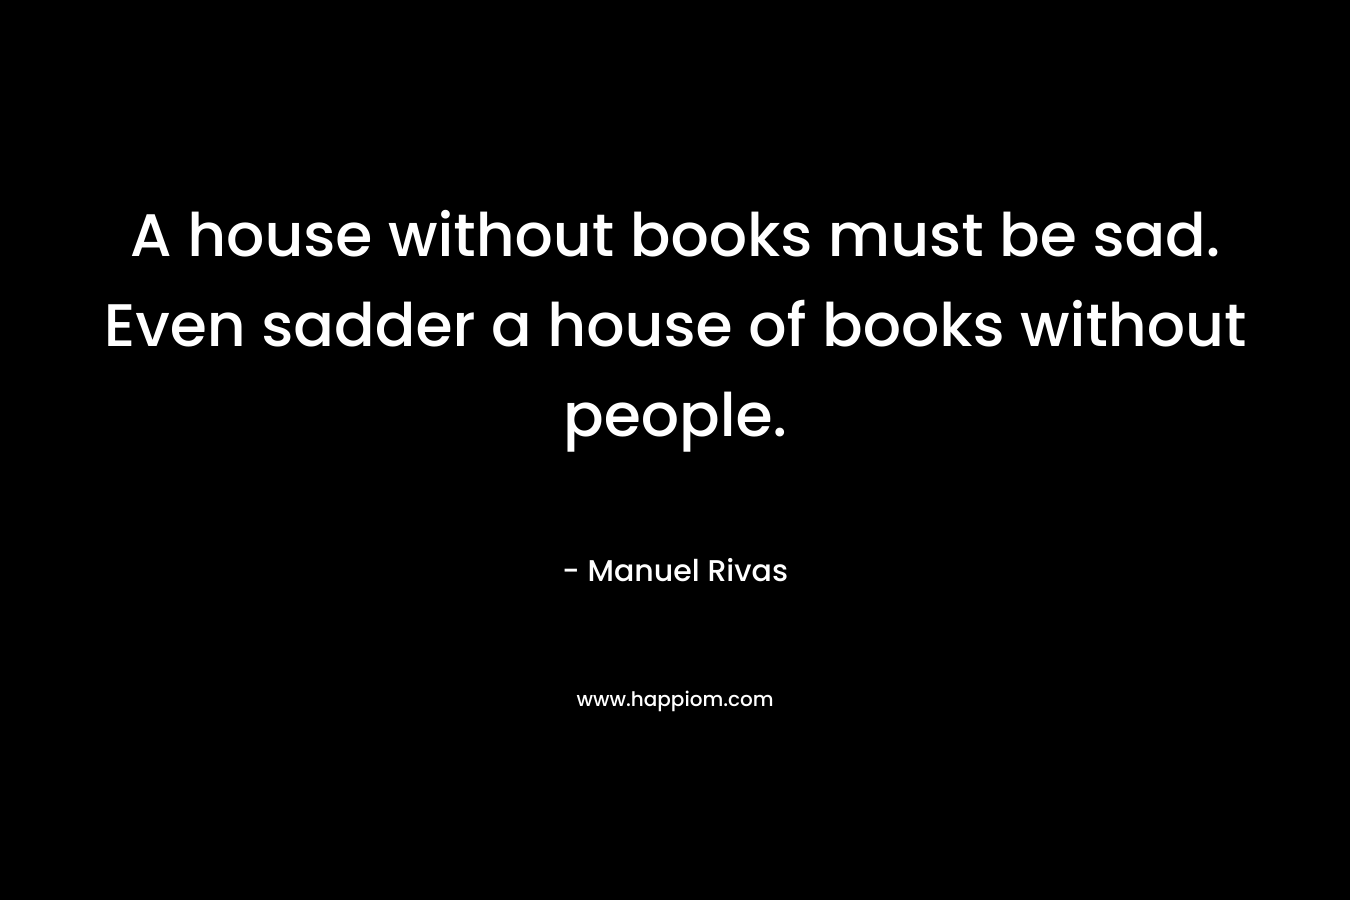 A house without books must be sad. Even sadder a house of books without people.